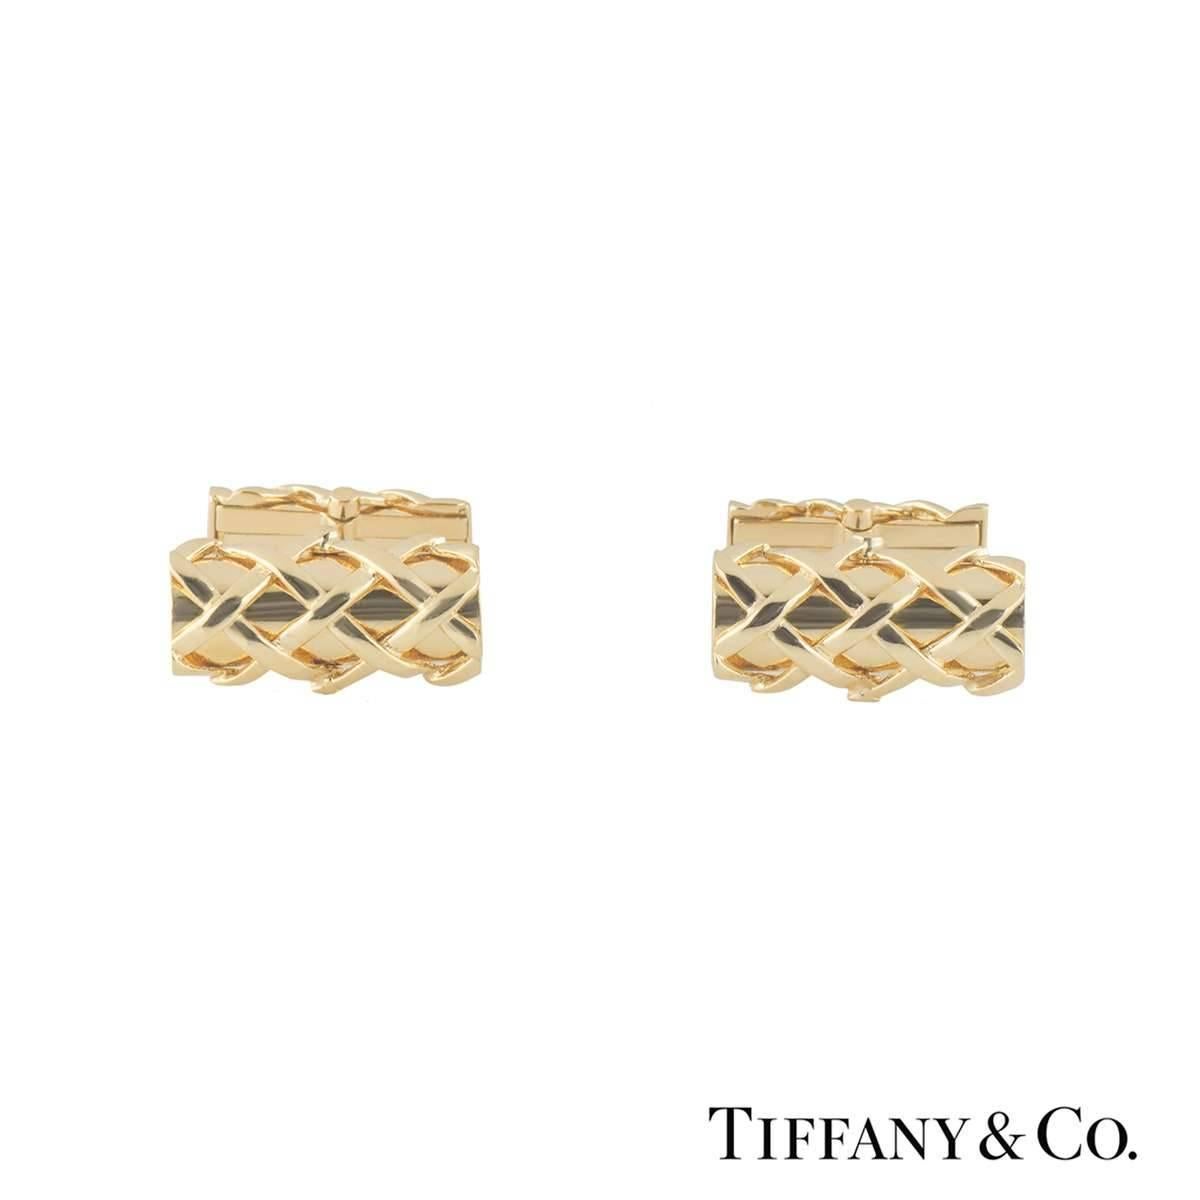 A smart pair of 18k yellow gold Tiffany & Co. cufflinks. The cufflinks comprise of a rectangular motif with a 3D basket design featuring a T-bar fitting. The cufflinks measure 18mm in width and 9mm in height with a gross weight of 21.10 grams. 

The